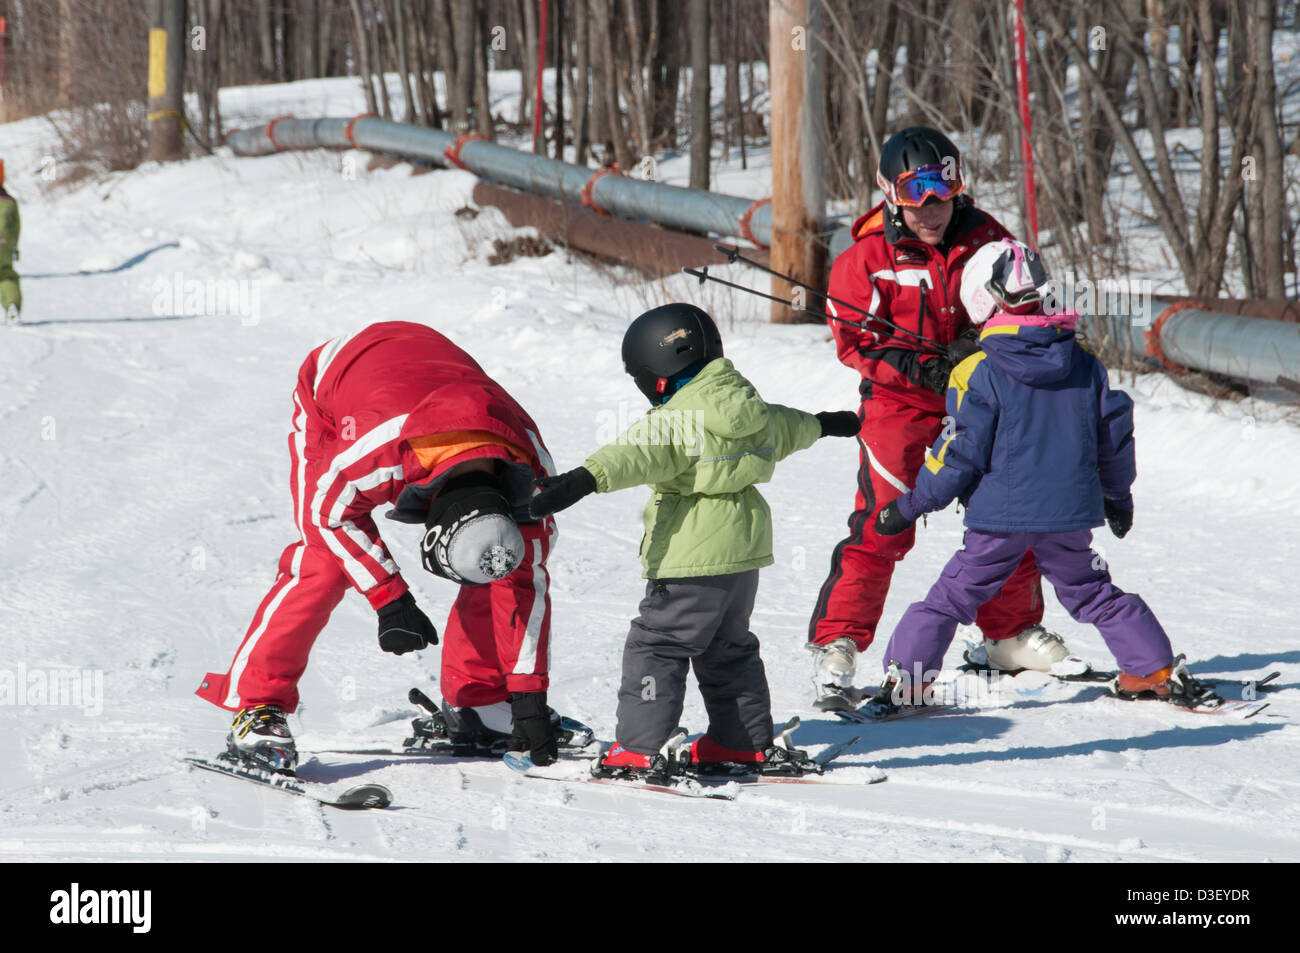 First Ski lesson of children from Montreal who came with his parents for his first  private ski lesson The Ski Saint Bruno station open since 1965 has had 500 000 students graduating from its ski school. Stock Photo